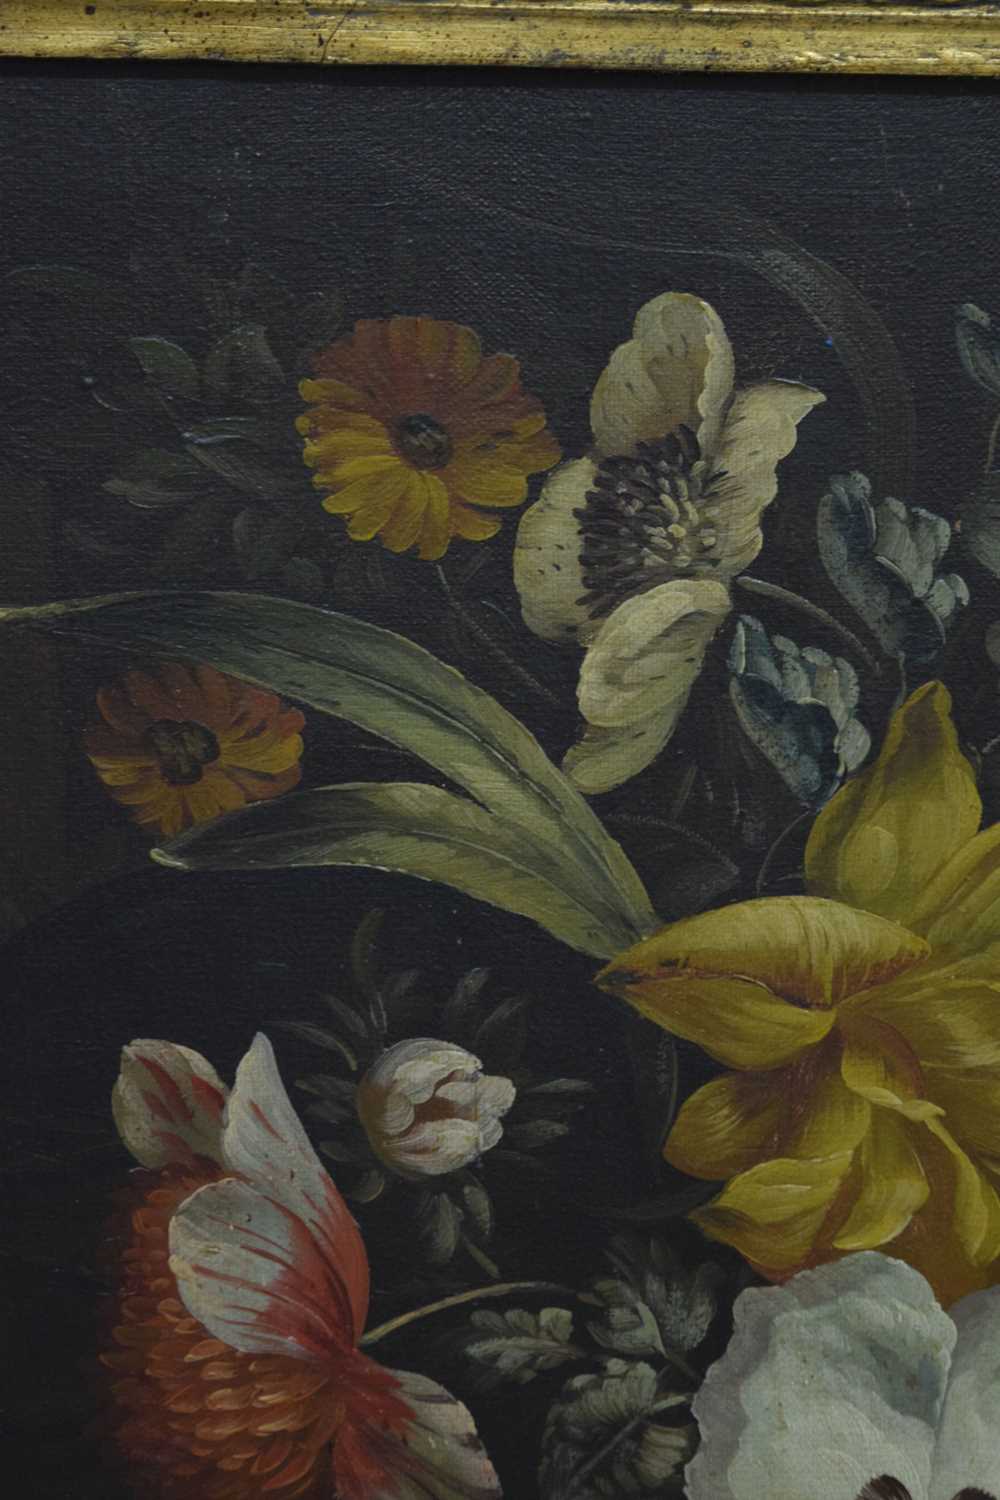 20th century Continental School - Still life with flowers, in 17th century taste - Image 4 of 10